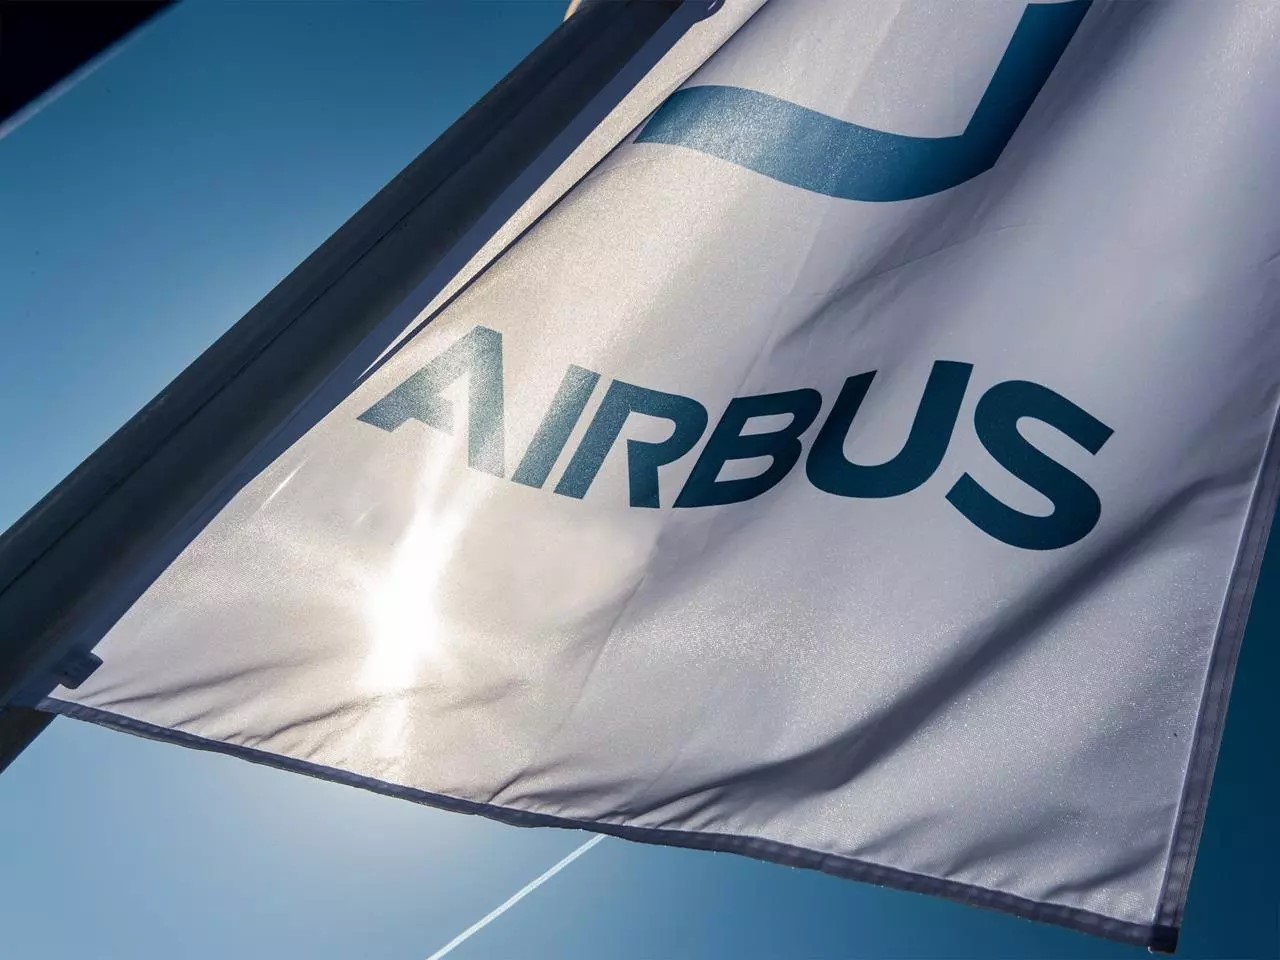 Airbus enters agreement with Spirit AeroSystems